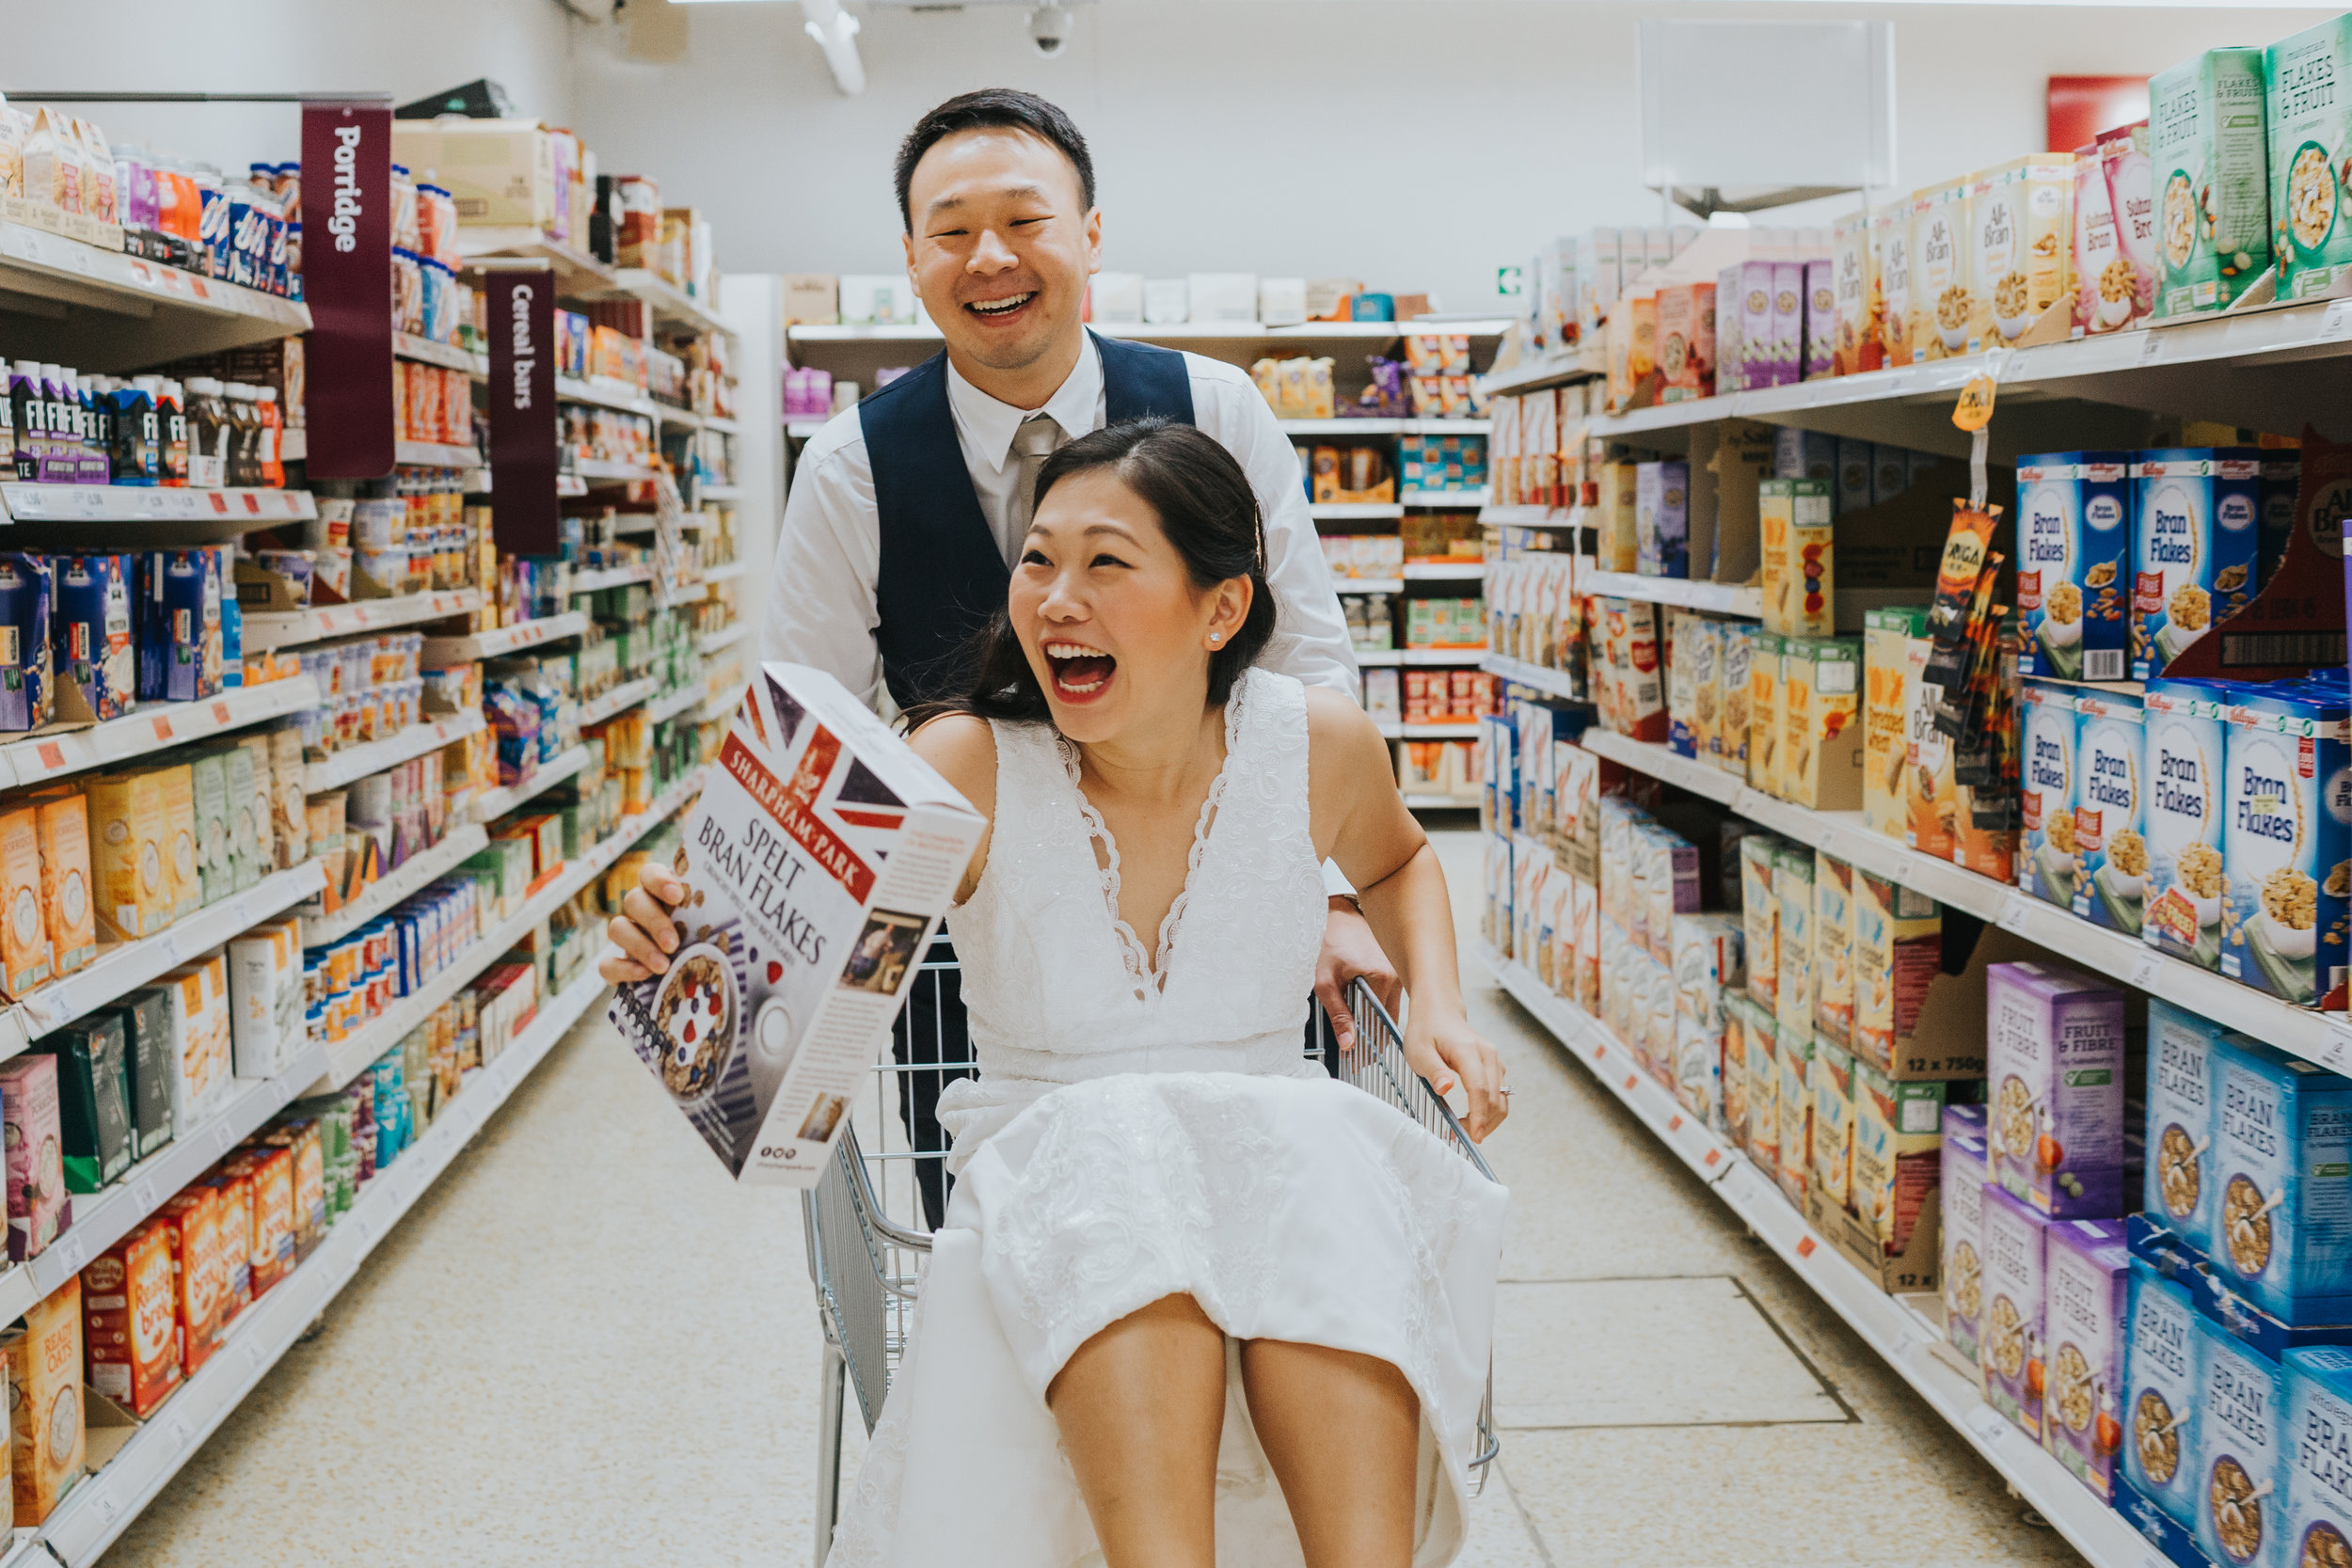 Groom pushes bride around in shopping trolly. 